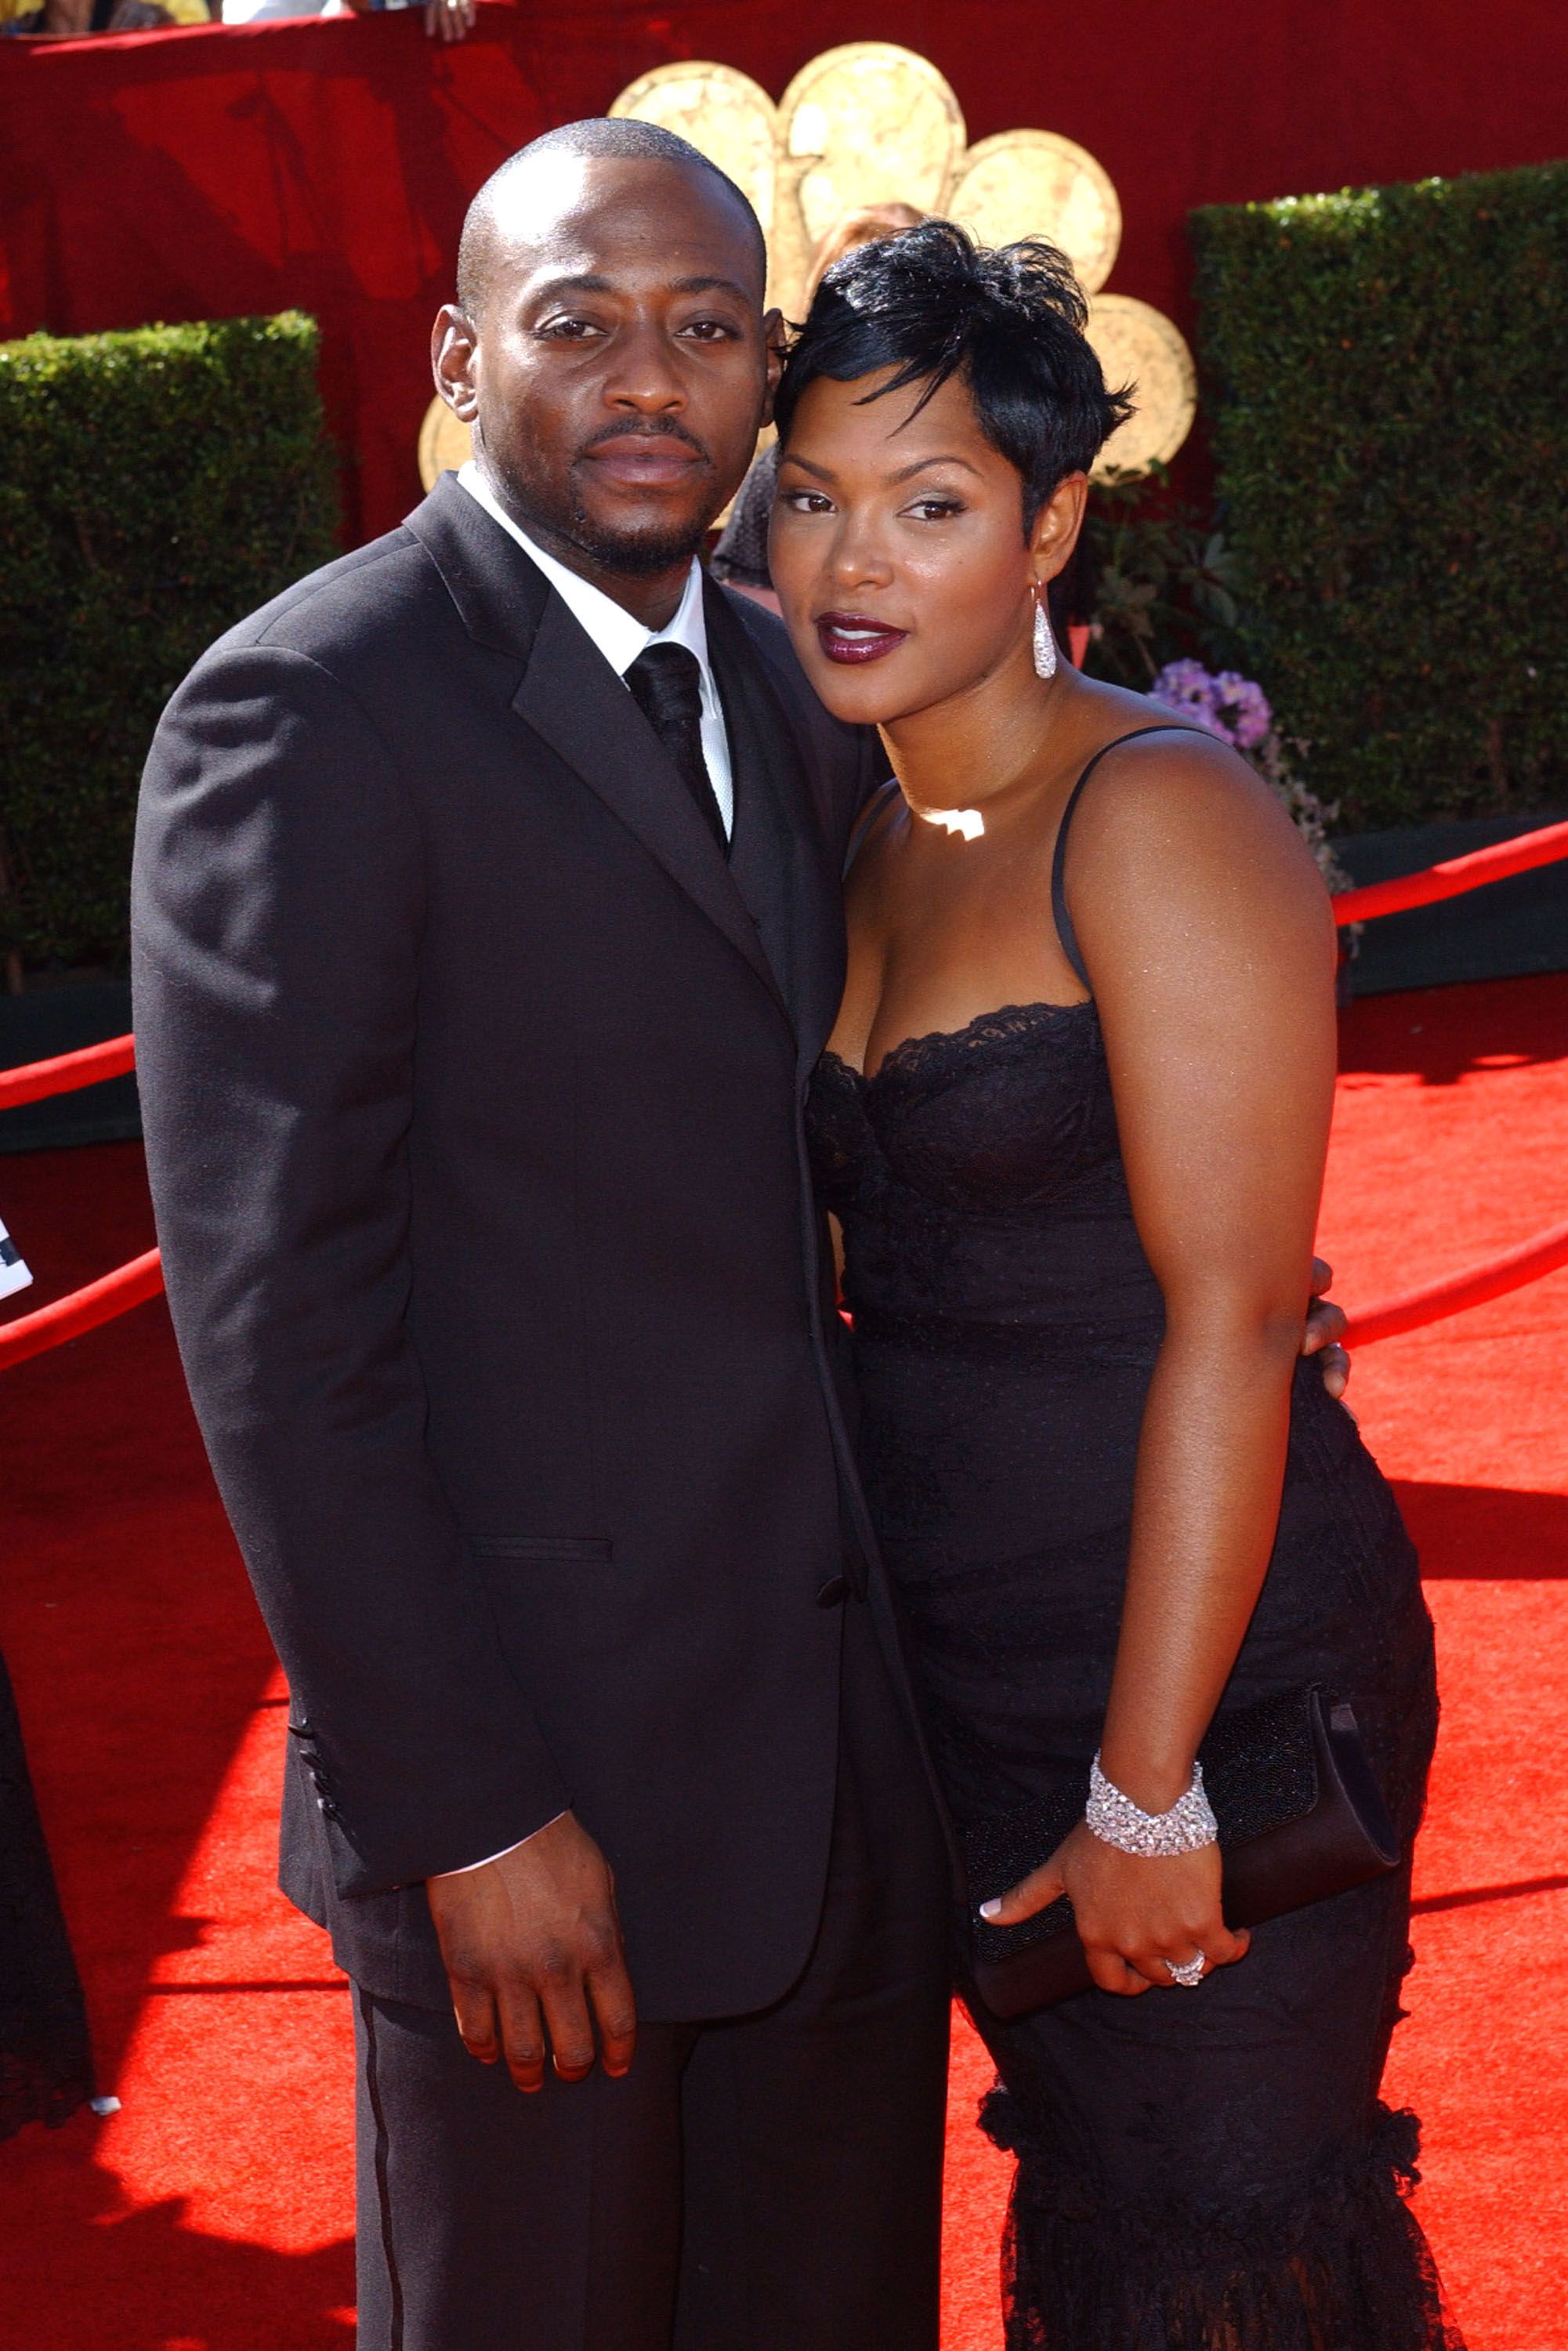 Omar Epps and wife Keisha Epps at the Shrine Auditorium, in August 2006 | Photo: Getty Images